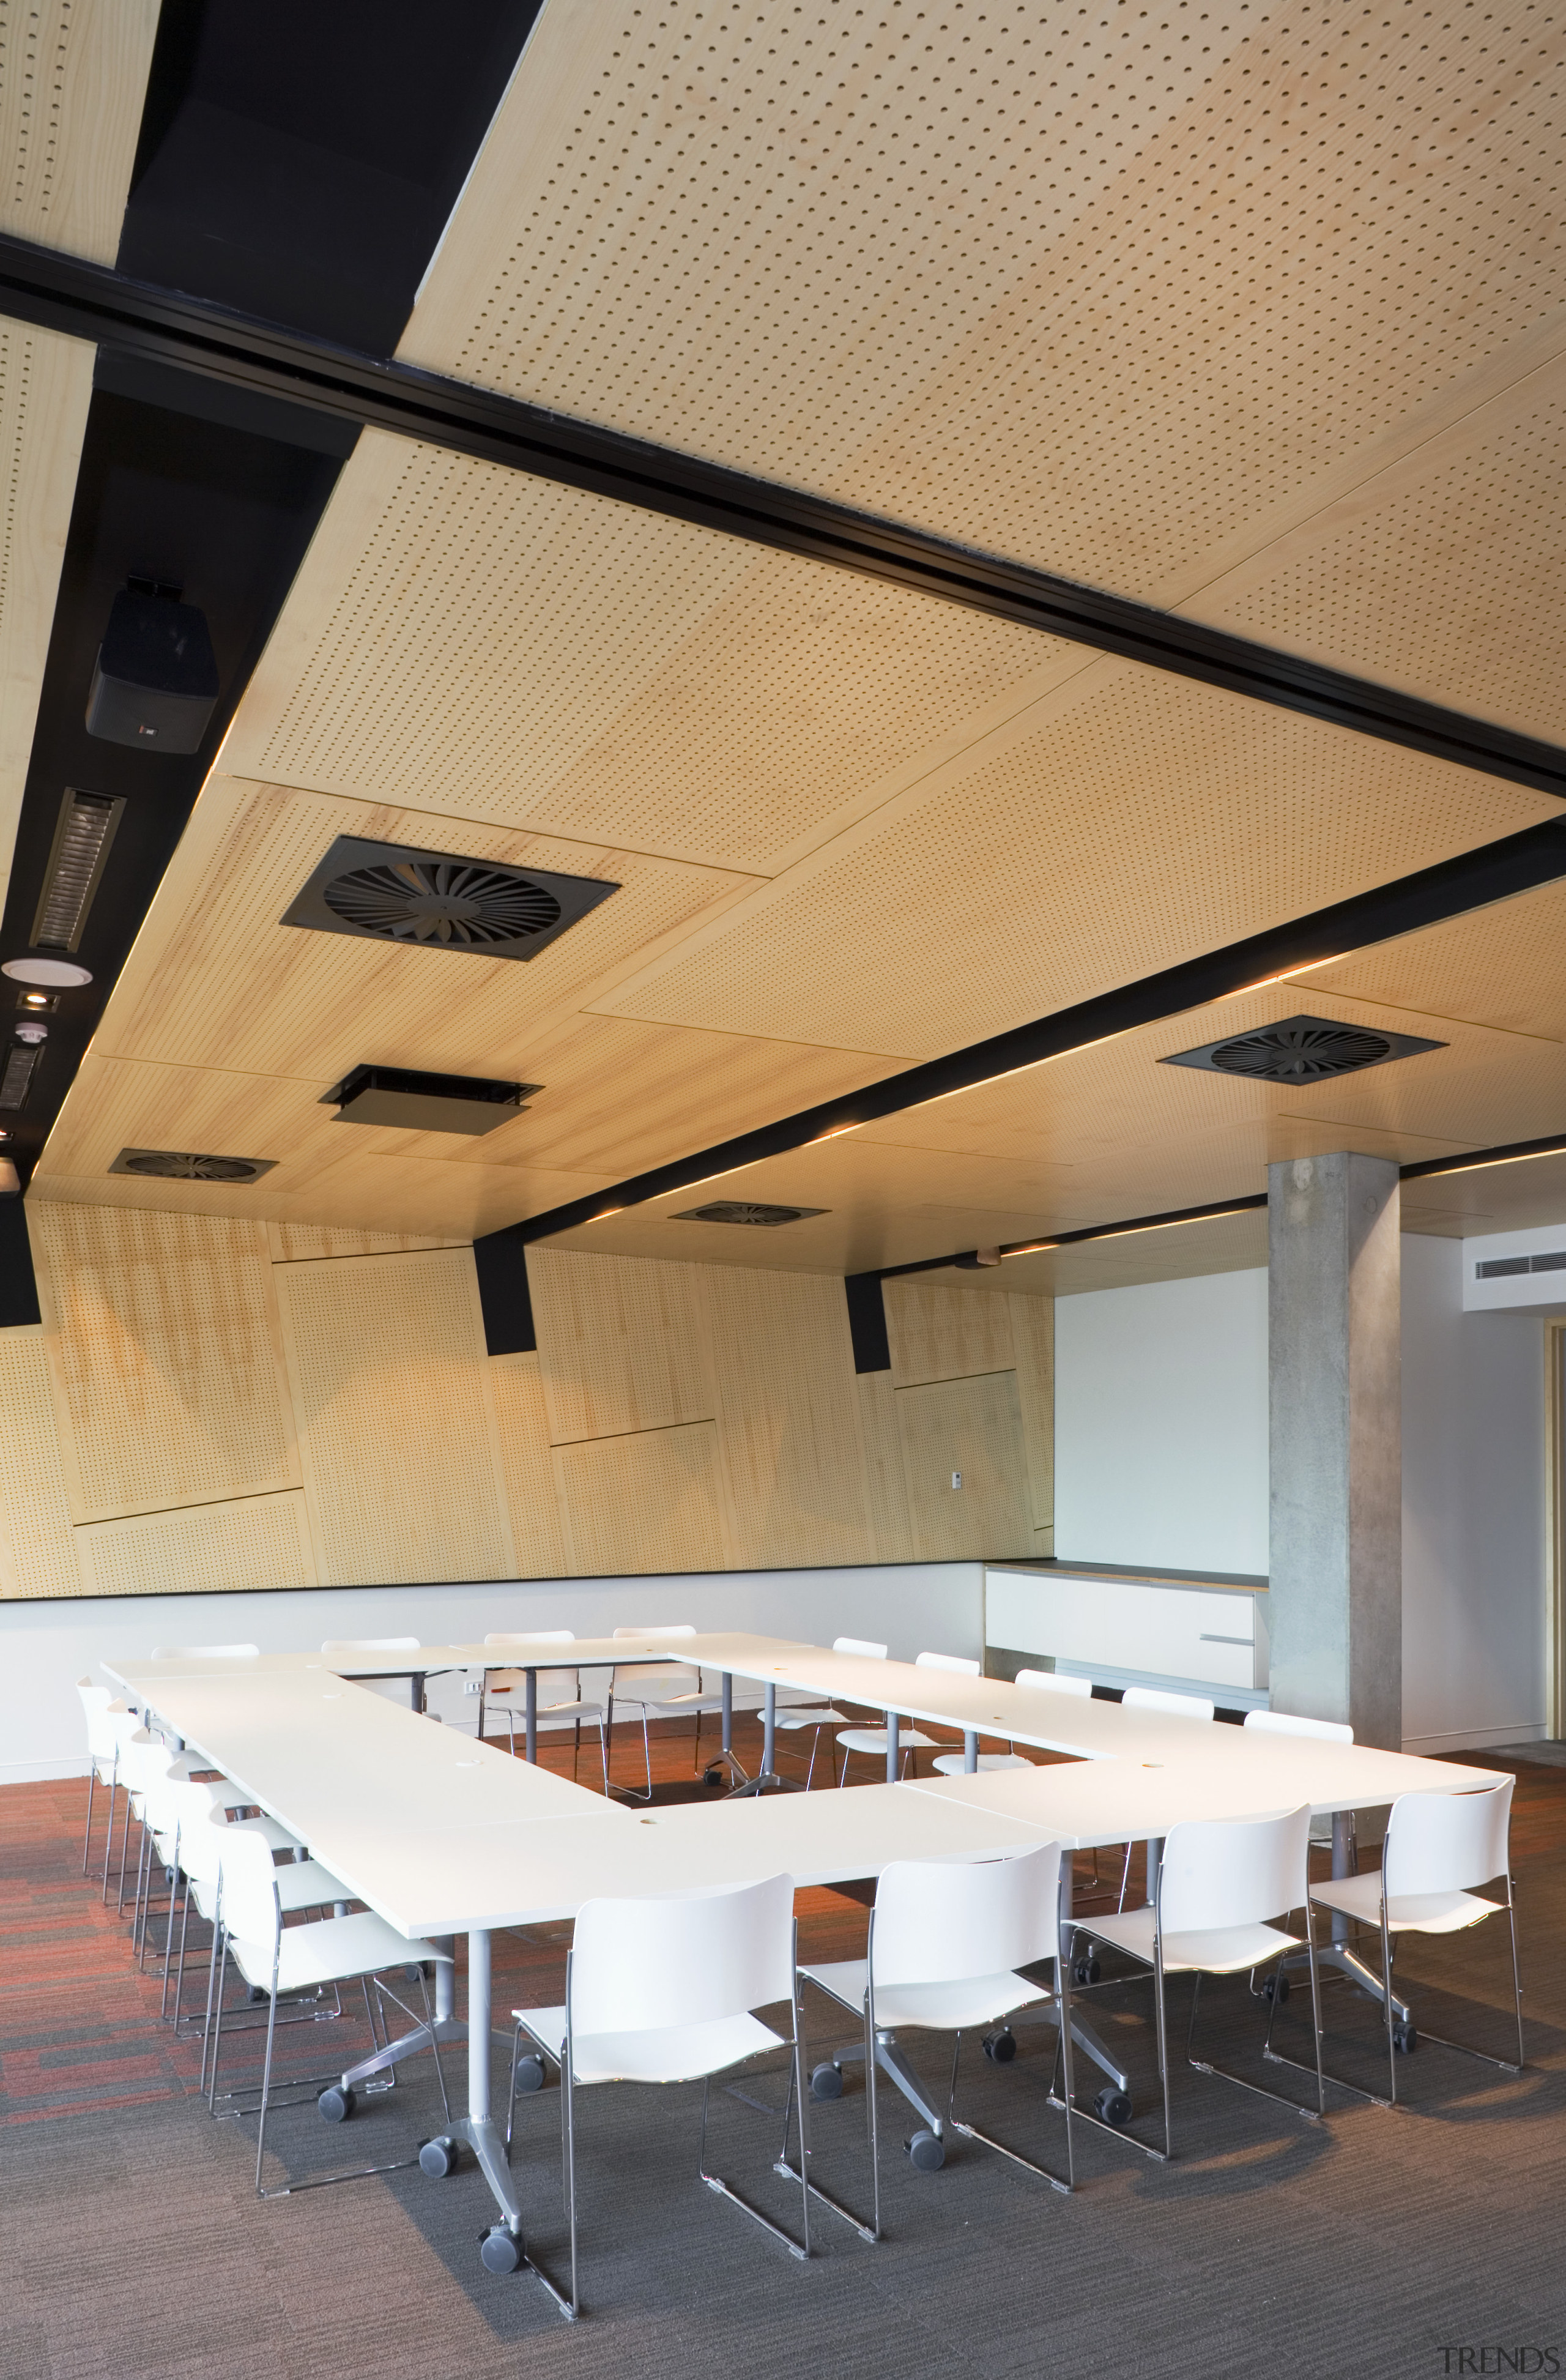 An interior view of the office building  architecture, ceiling, conference hall, daylighting, furniture, interior design, table, orange